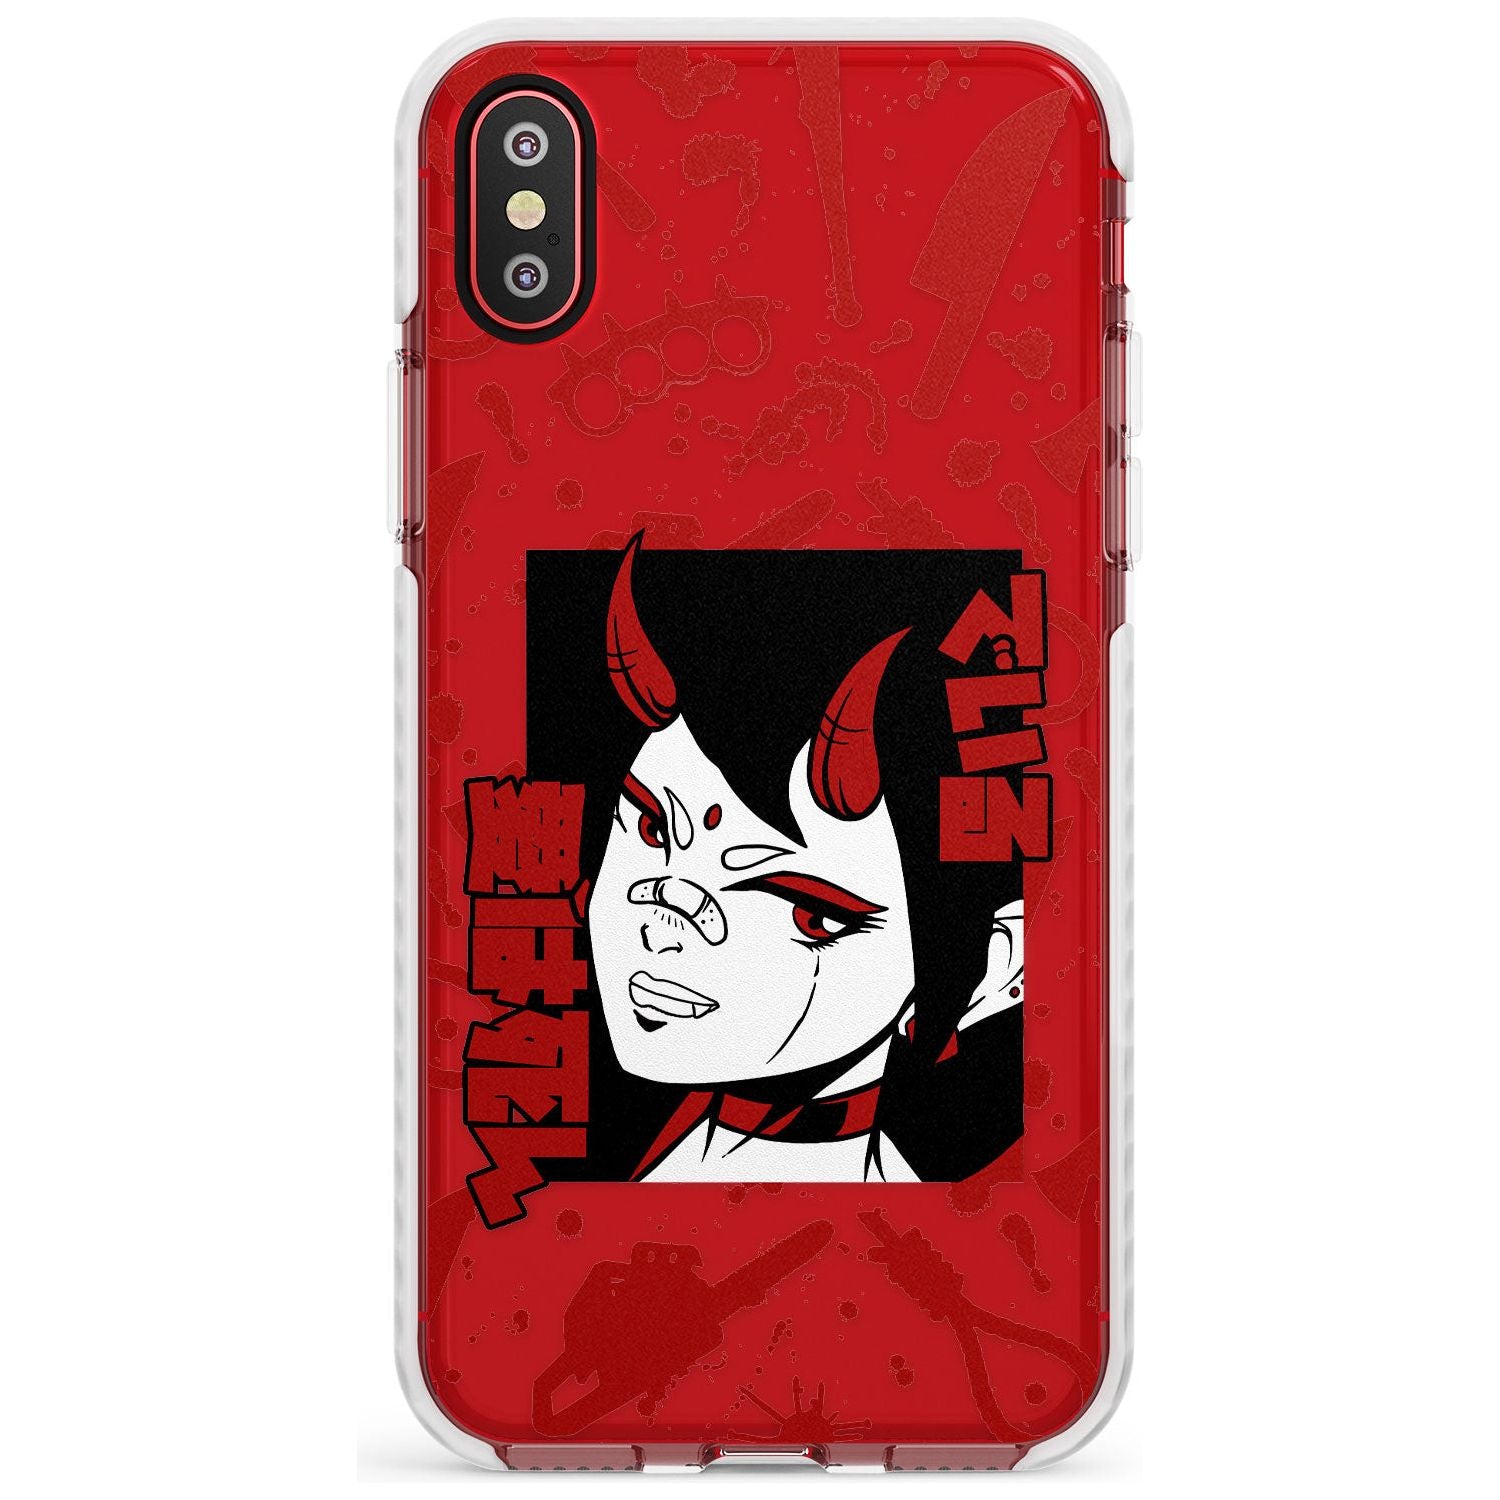 She's a Devil Impact Phone Case for iPhone X XS Max XR